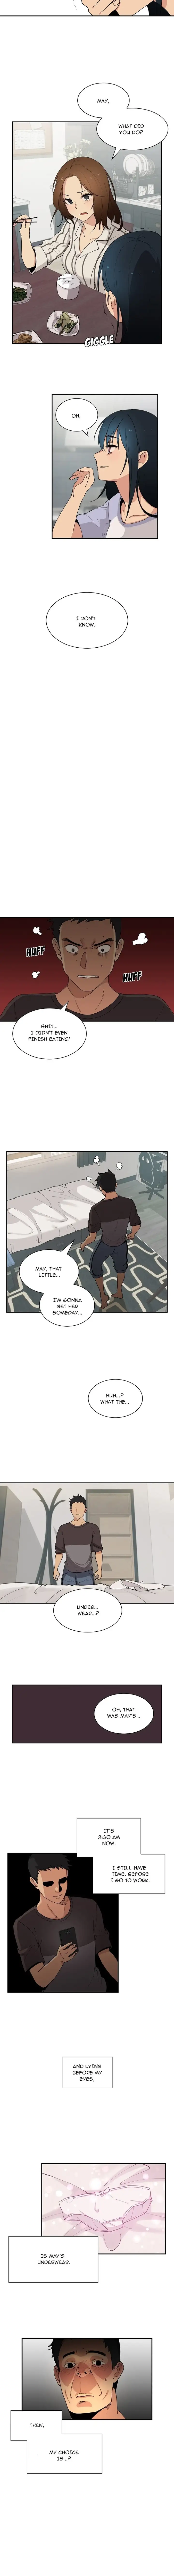 Close as Neighbors - Chapter 1 Page 8